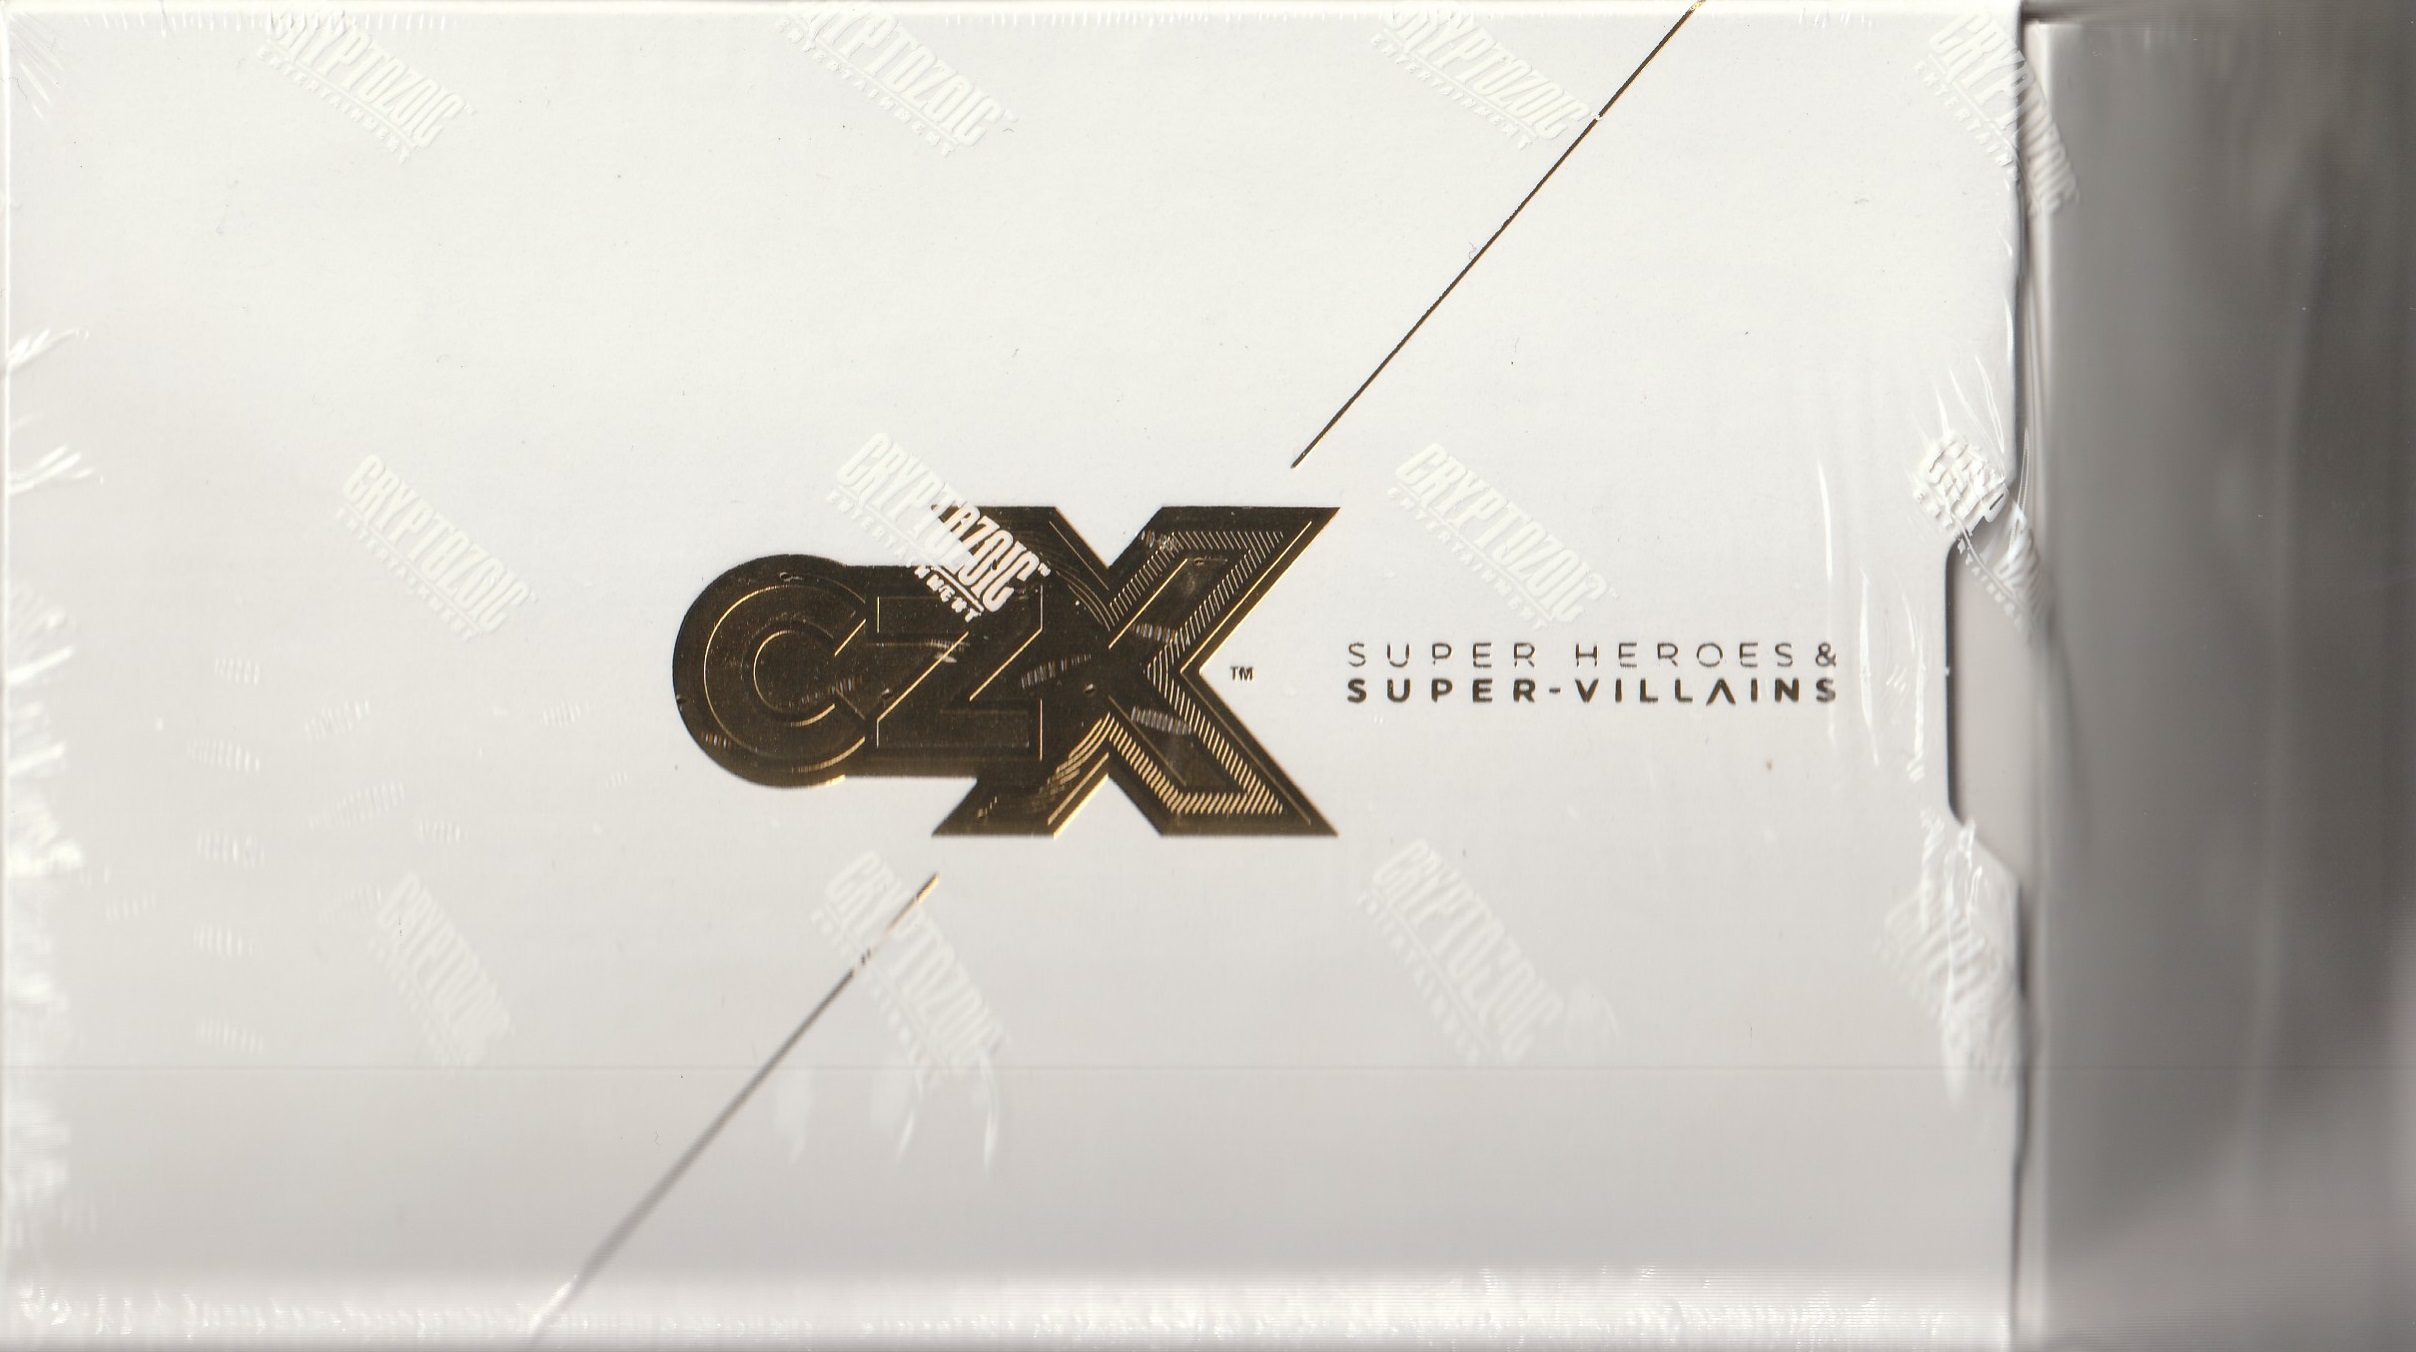 CRYPTOZOIC 2019 CZX SUPER HEROES  SUPER VILLAINS | Trading Card Journal